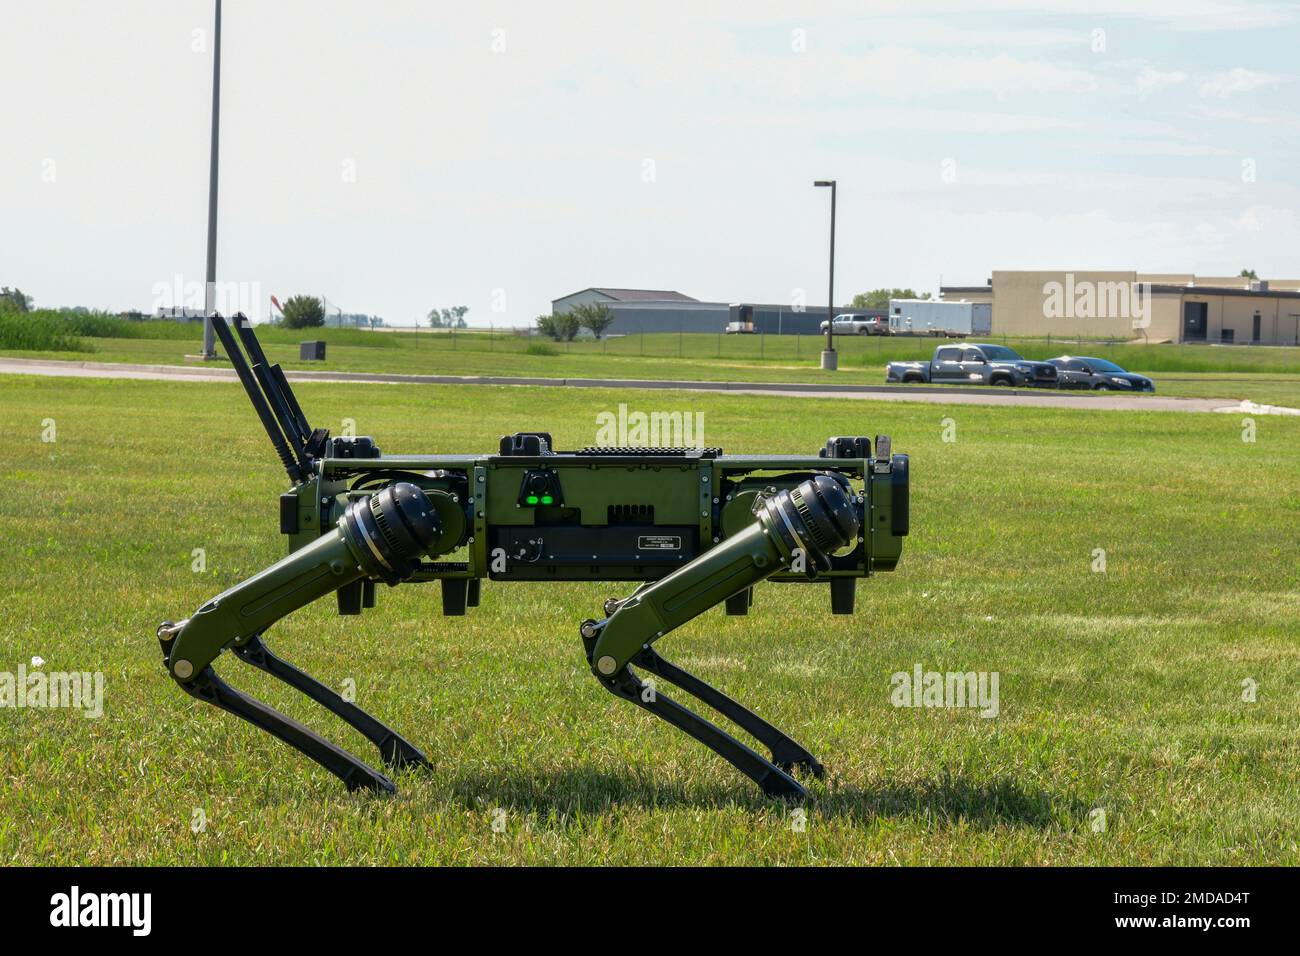 Members of the 5th Civil Engineer Squadron Chemical, Biological, Radiological and Nuclear team (CBRN) train on the new Vision 60 'Robot Dog' on Minot Air Force Base, North Dakota, June 14, 2022. The Robot Dog is a high endurance, agile and durable all-weather ground drone that will aid the 5 CES to respond to and recover from CBRN events. Stock Photo